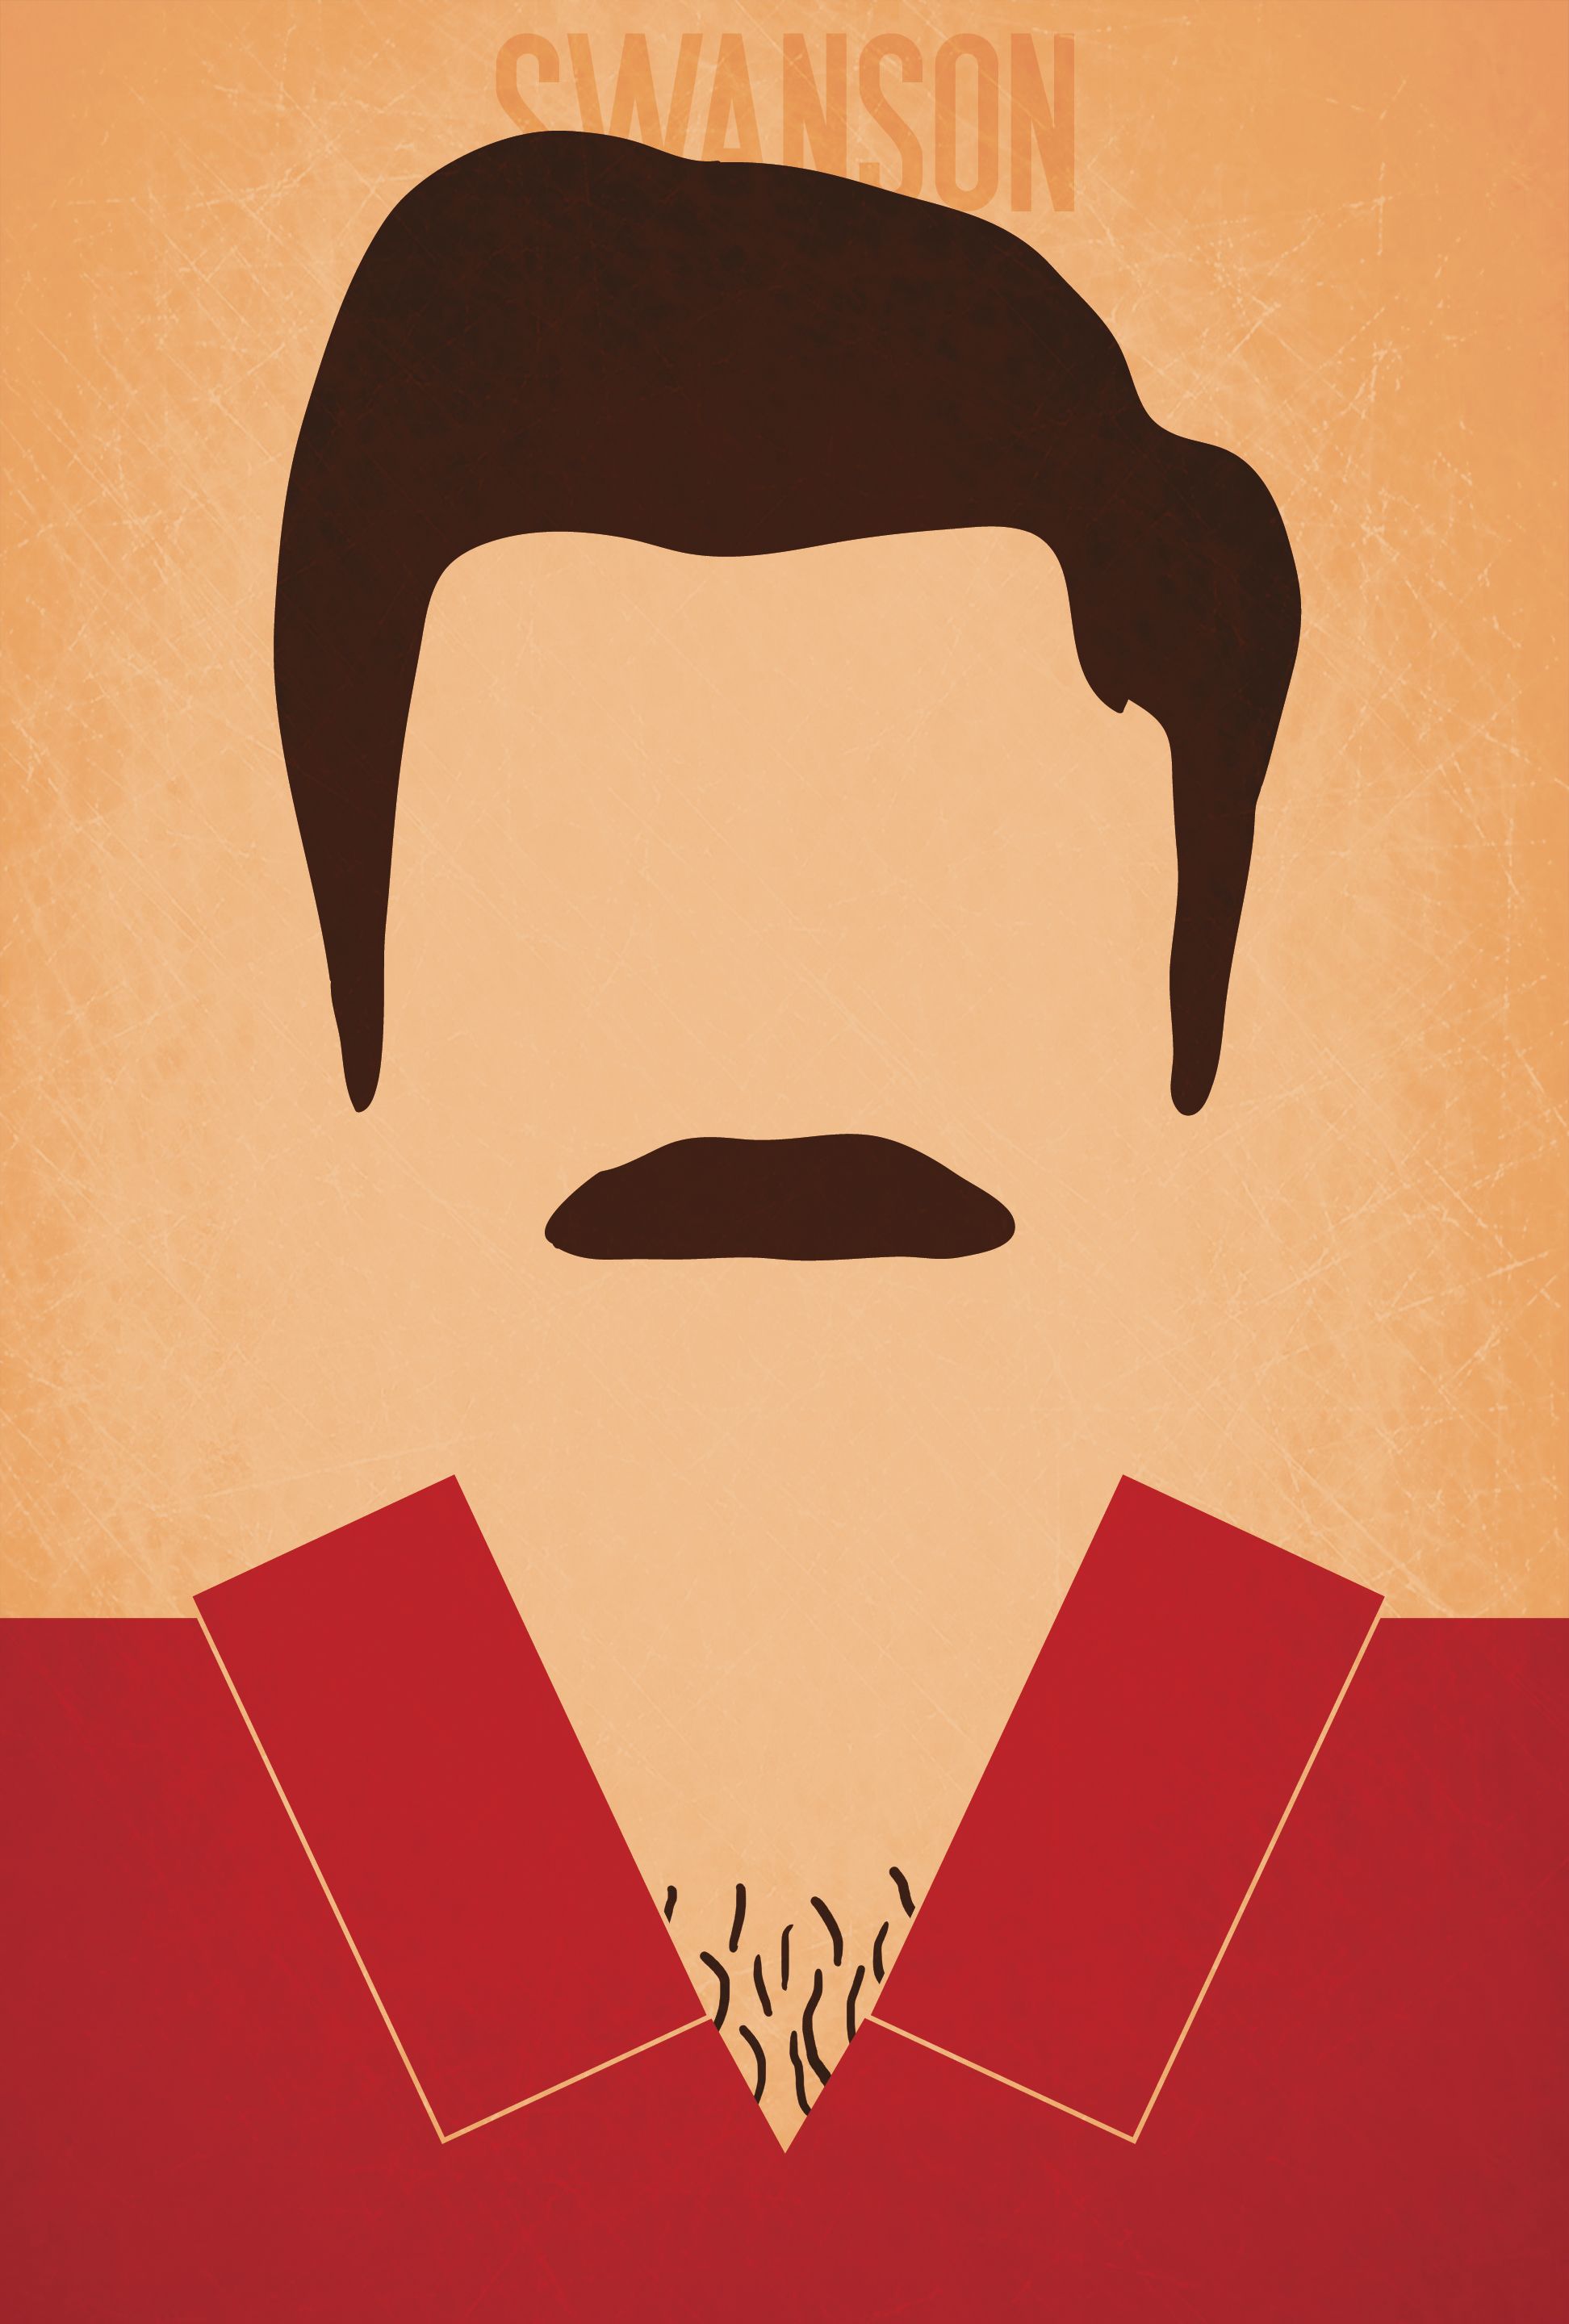 Minimalist Parks and Recreation Posters. Minimalist poster, Parks